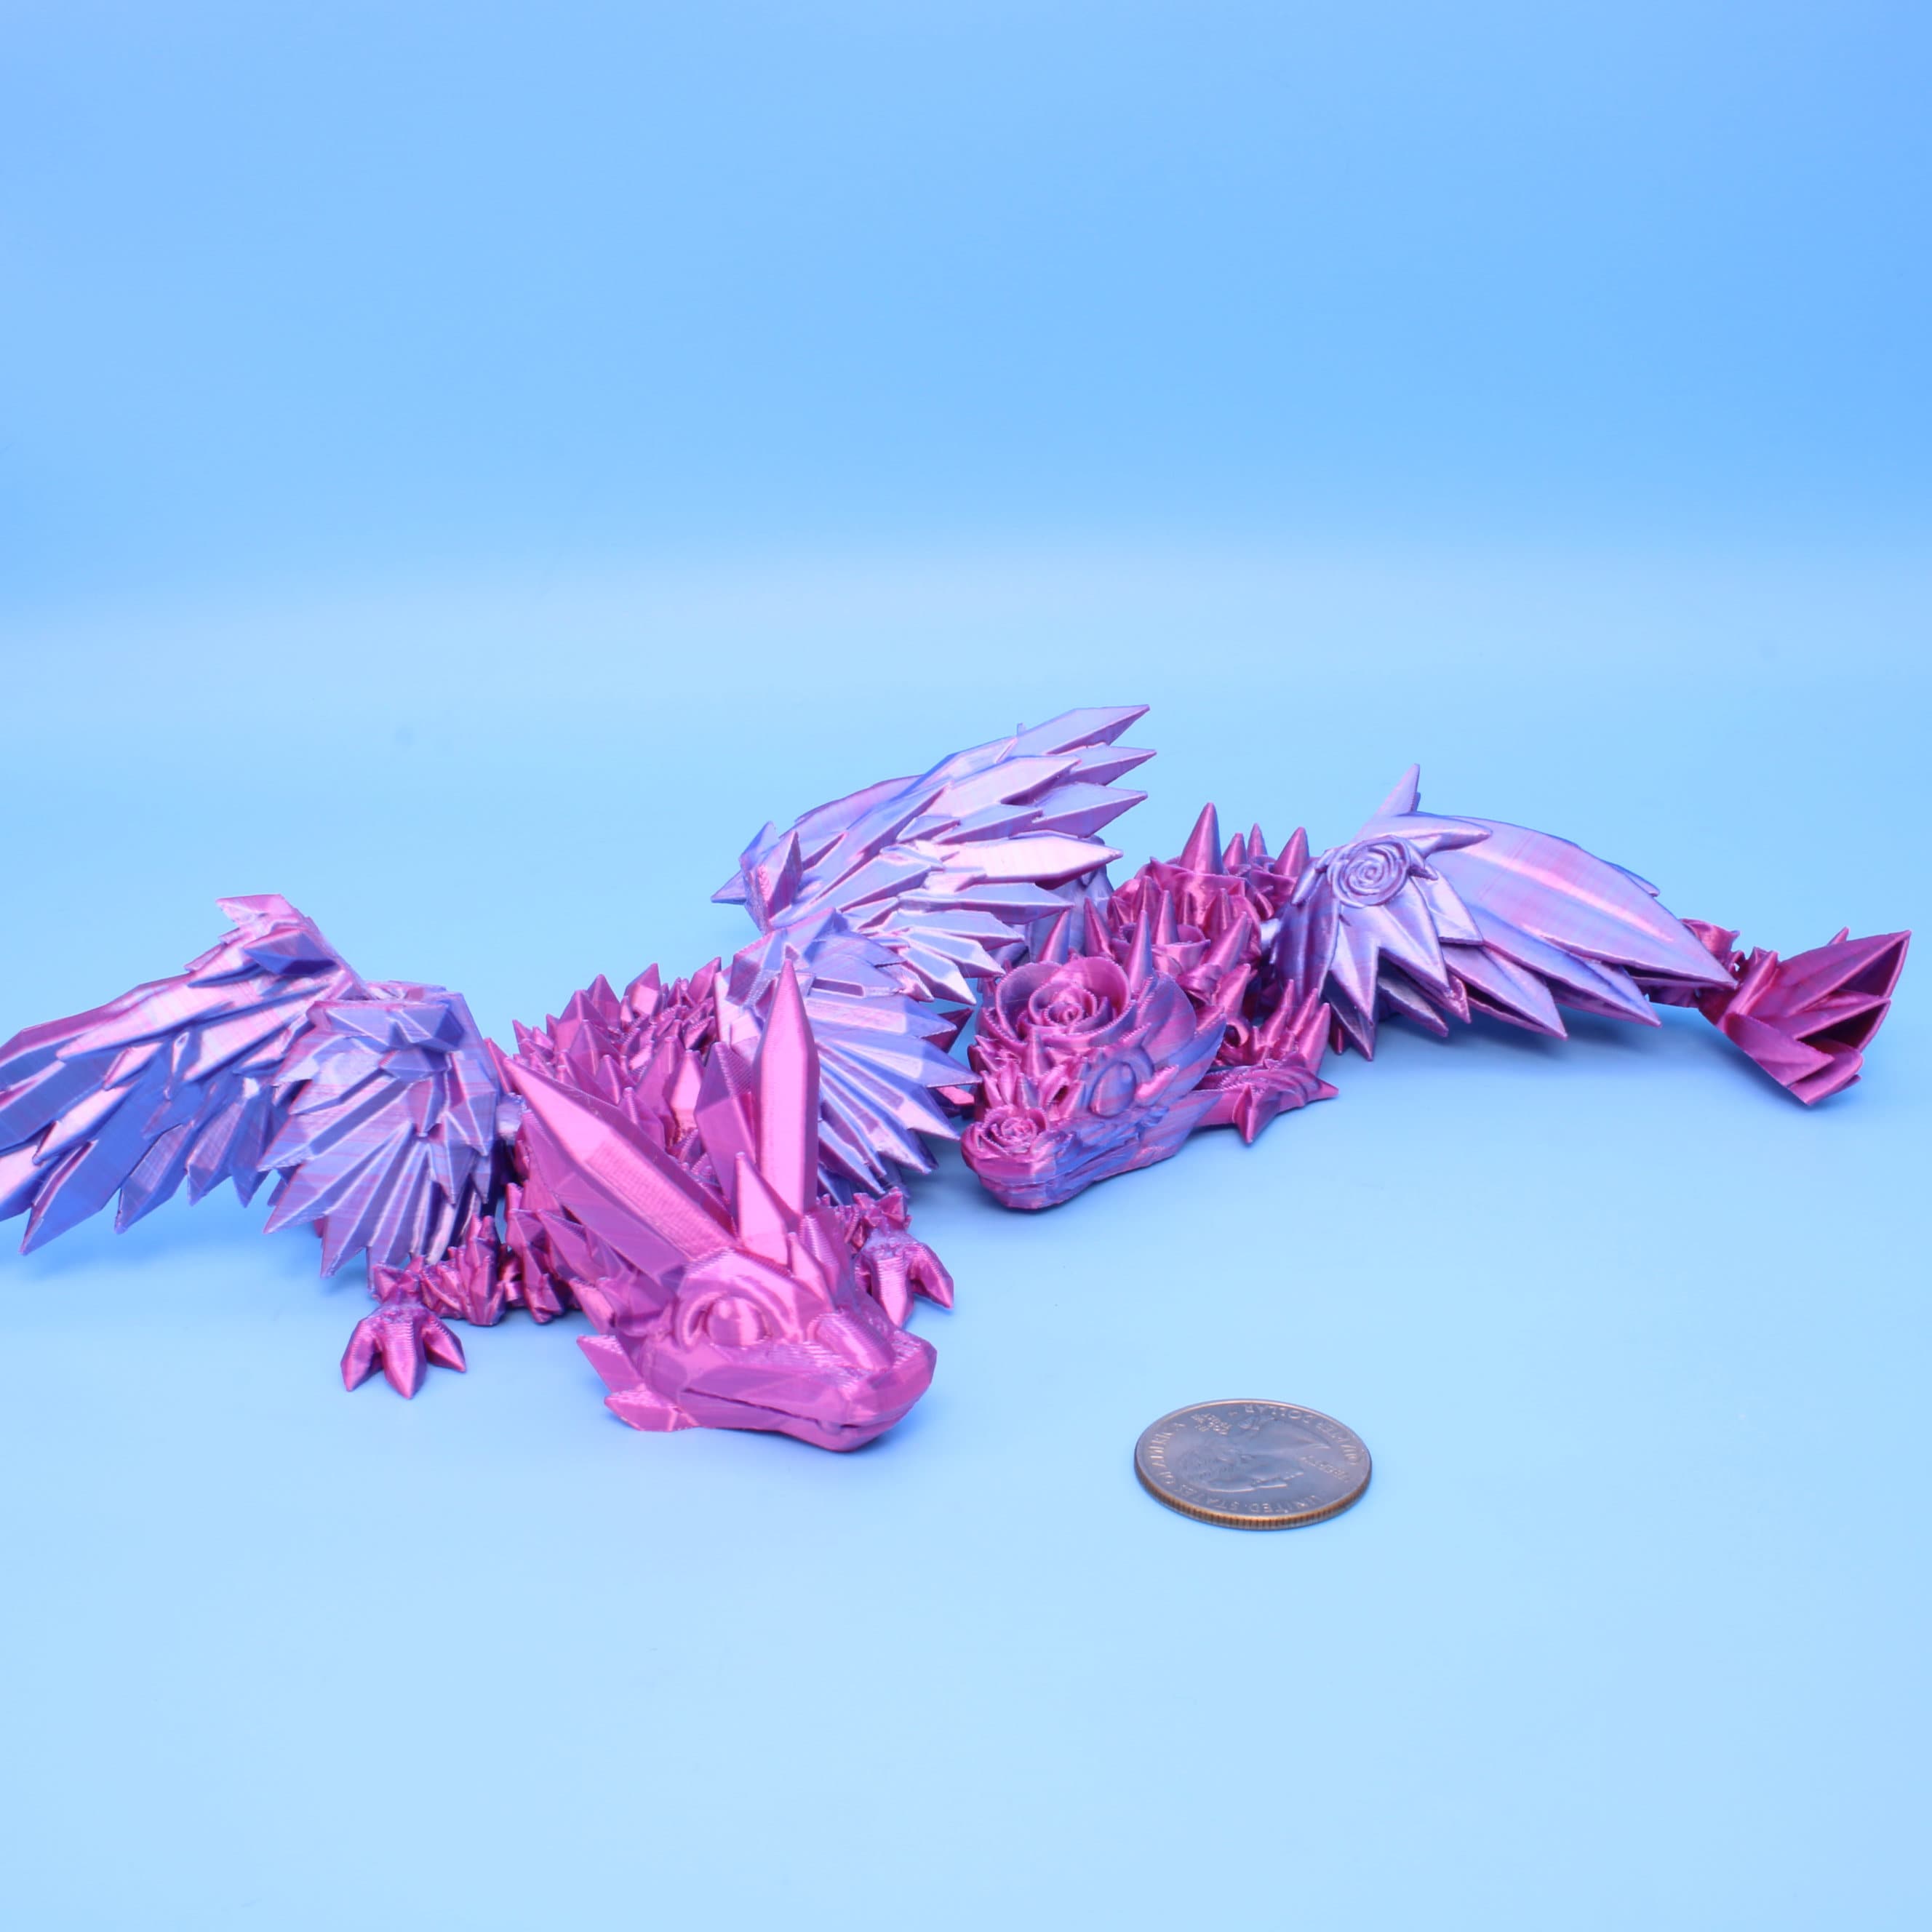 Baby Crystal & Rose Wing Dragon | Miniature | 3D printed | 7 in.